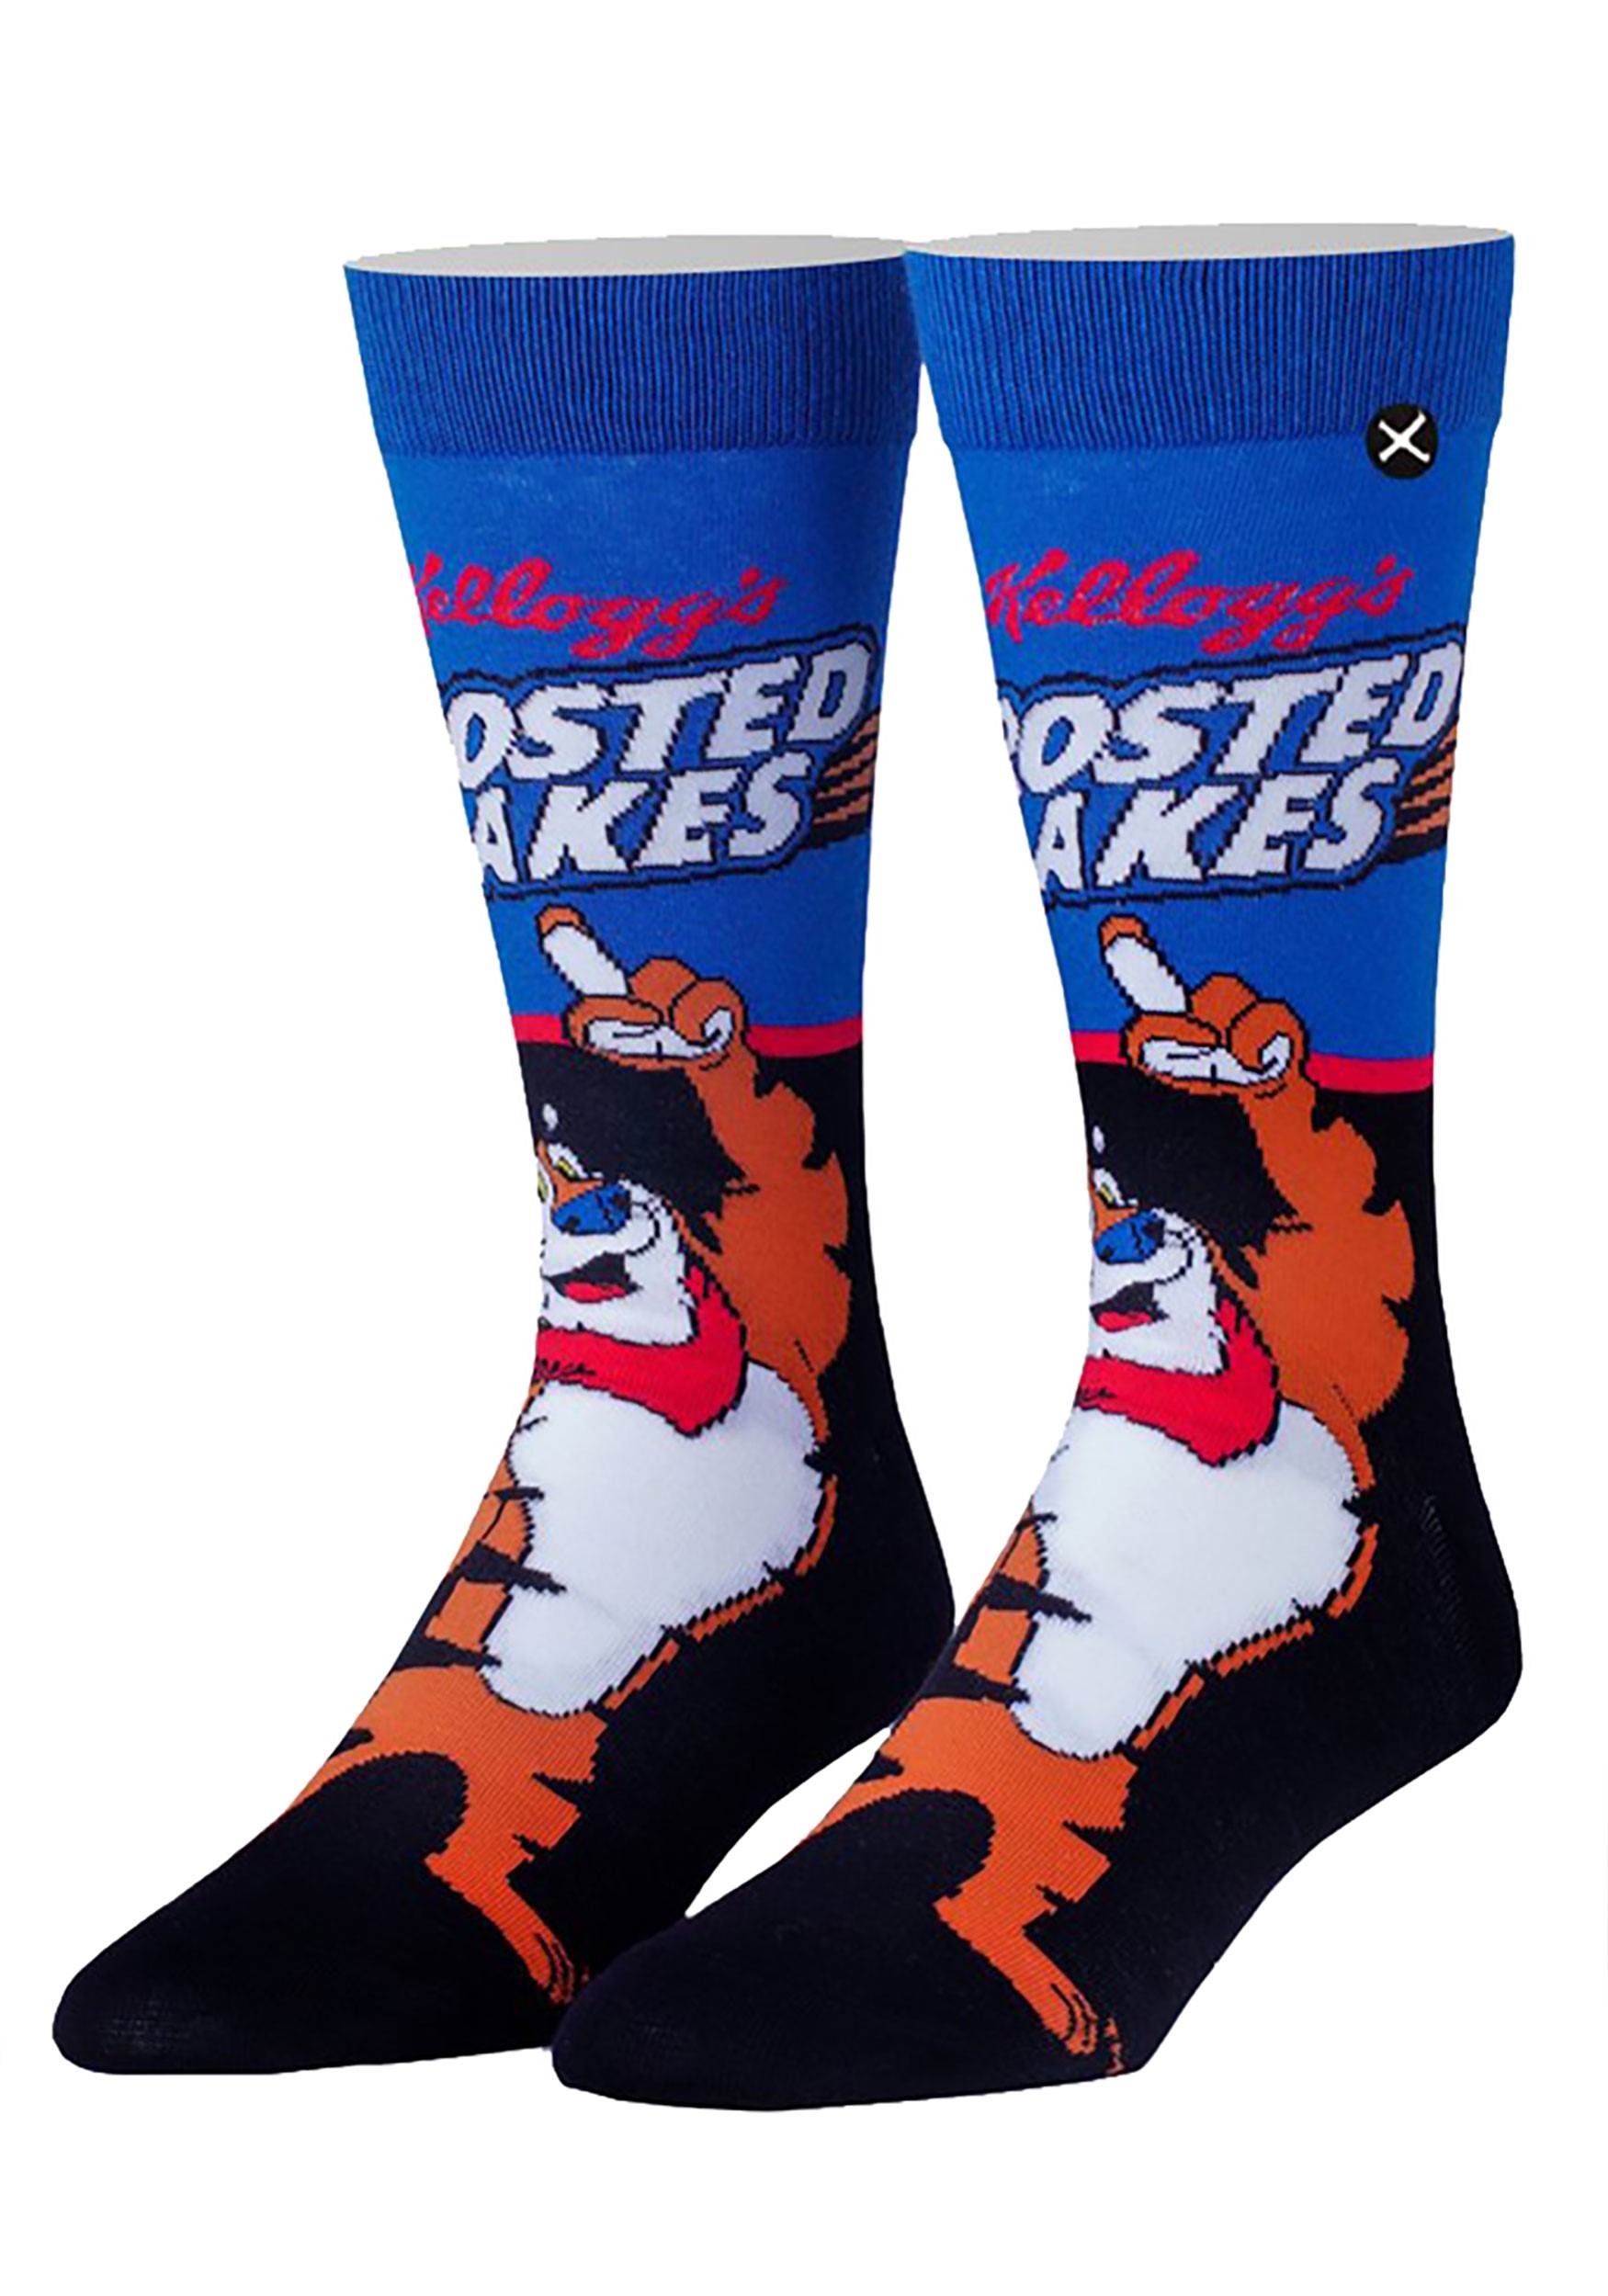 Adult Frosted Flakes Cereal Knit Crew Socks , Adult Socks